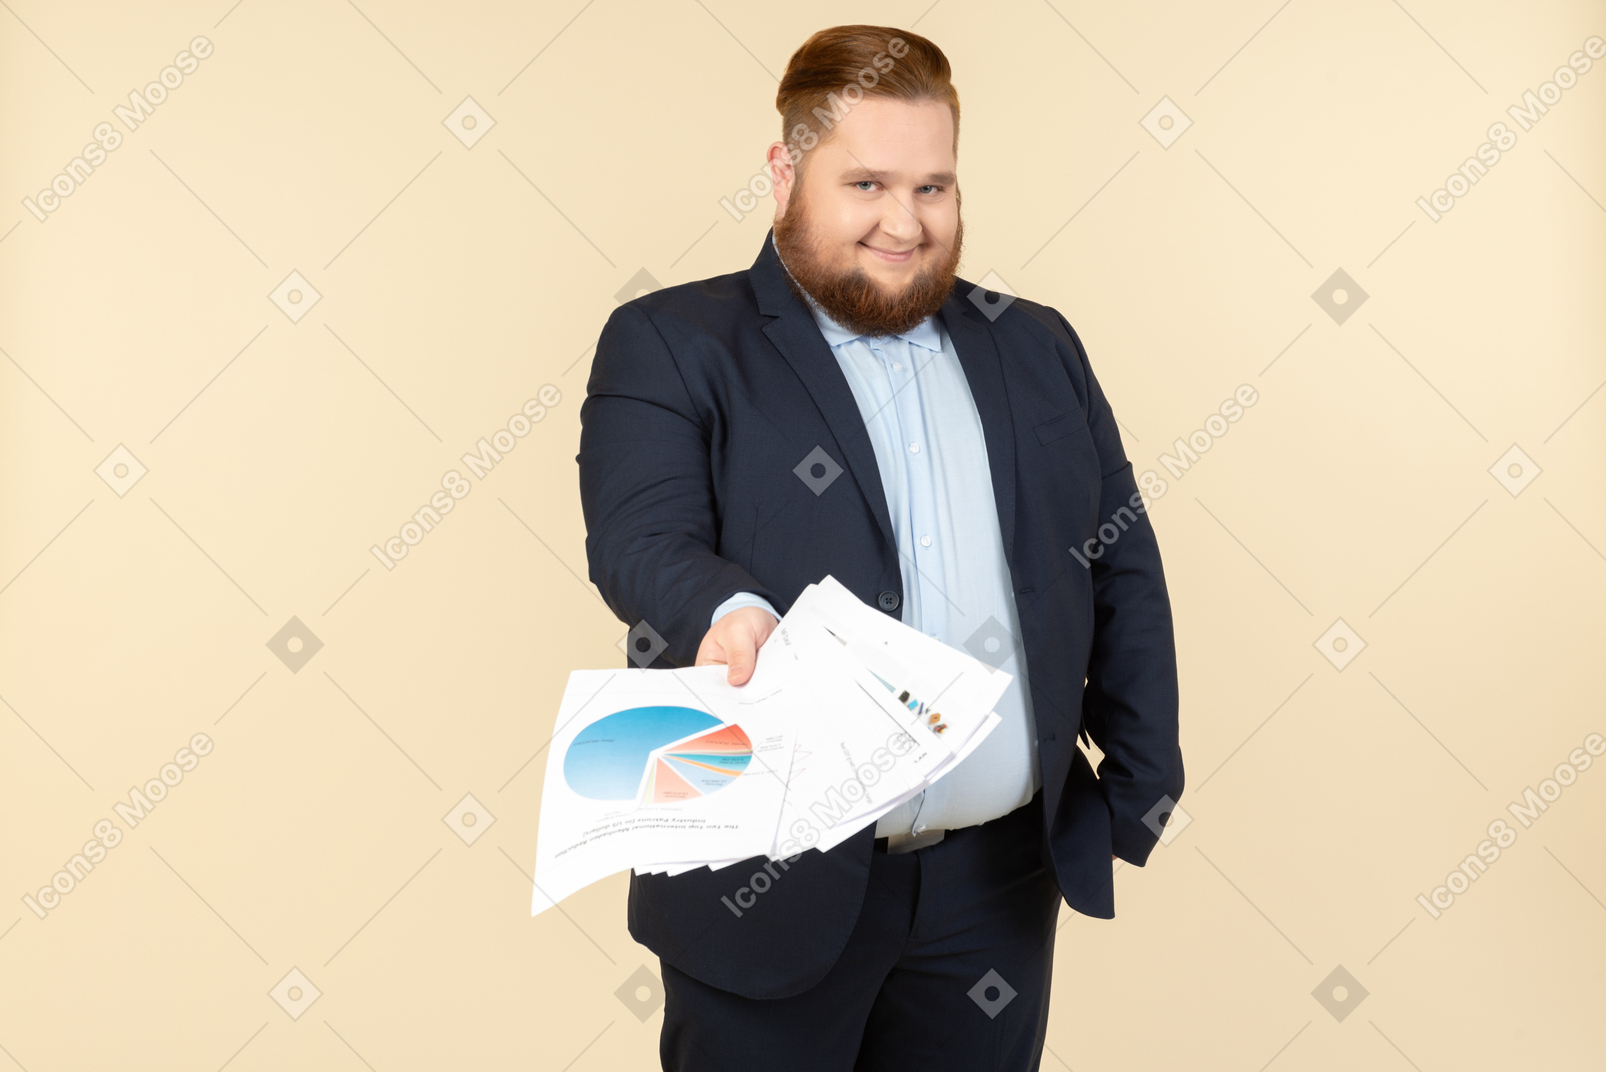 Smiling overweight male office worker handling papers =